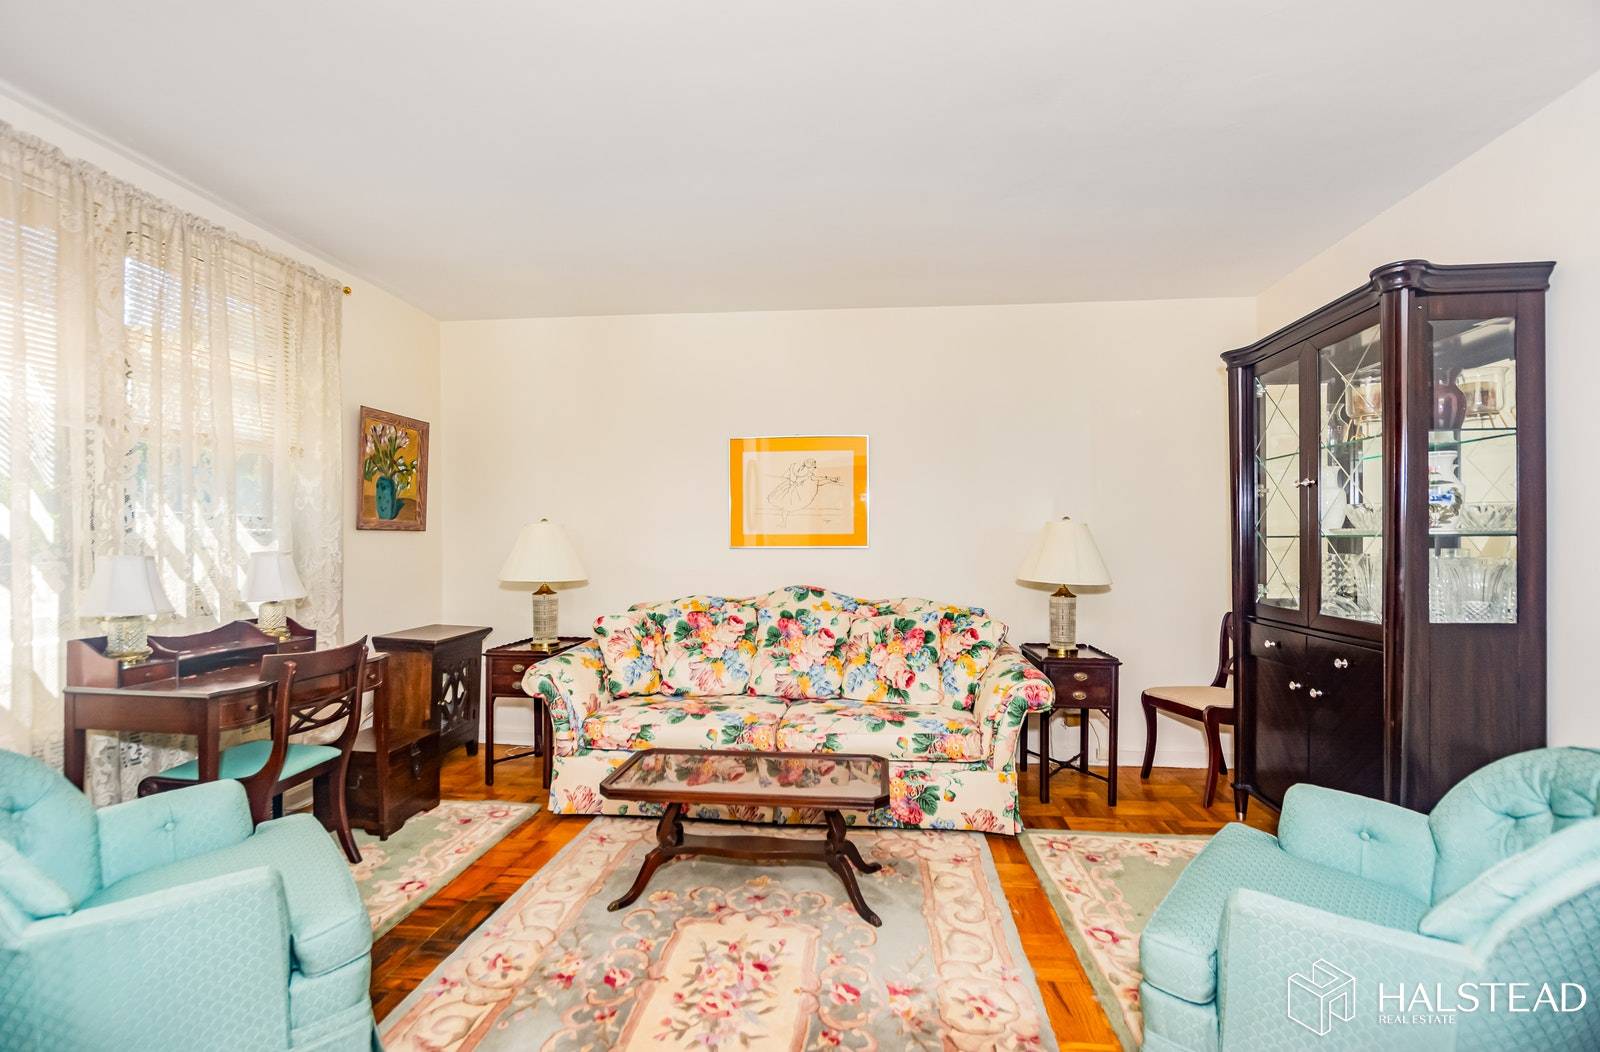 There is now no better deal on a one bedroom anywhere in this neighborhood Introducing apartment 1D, a SECOND FLOOR one bedroom in an intimate elevator building on one of ...